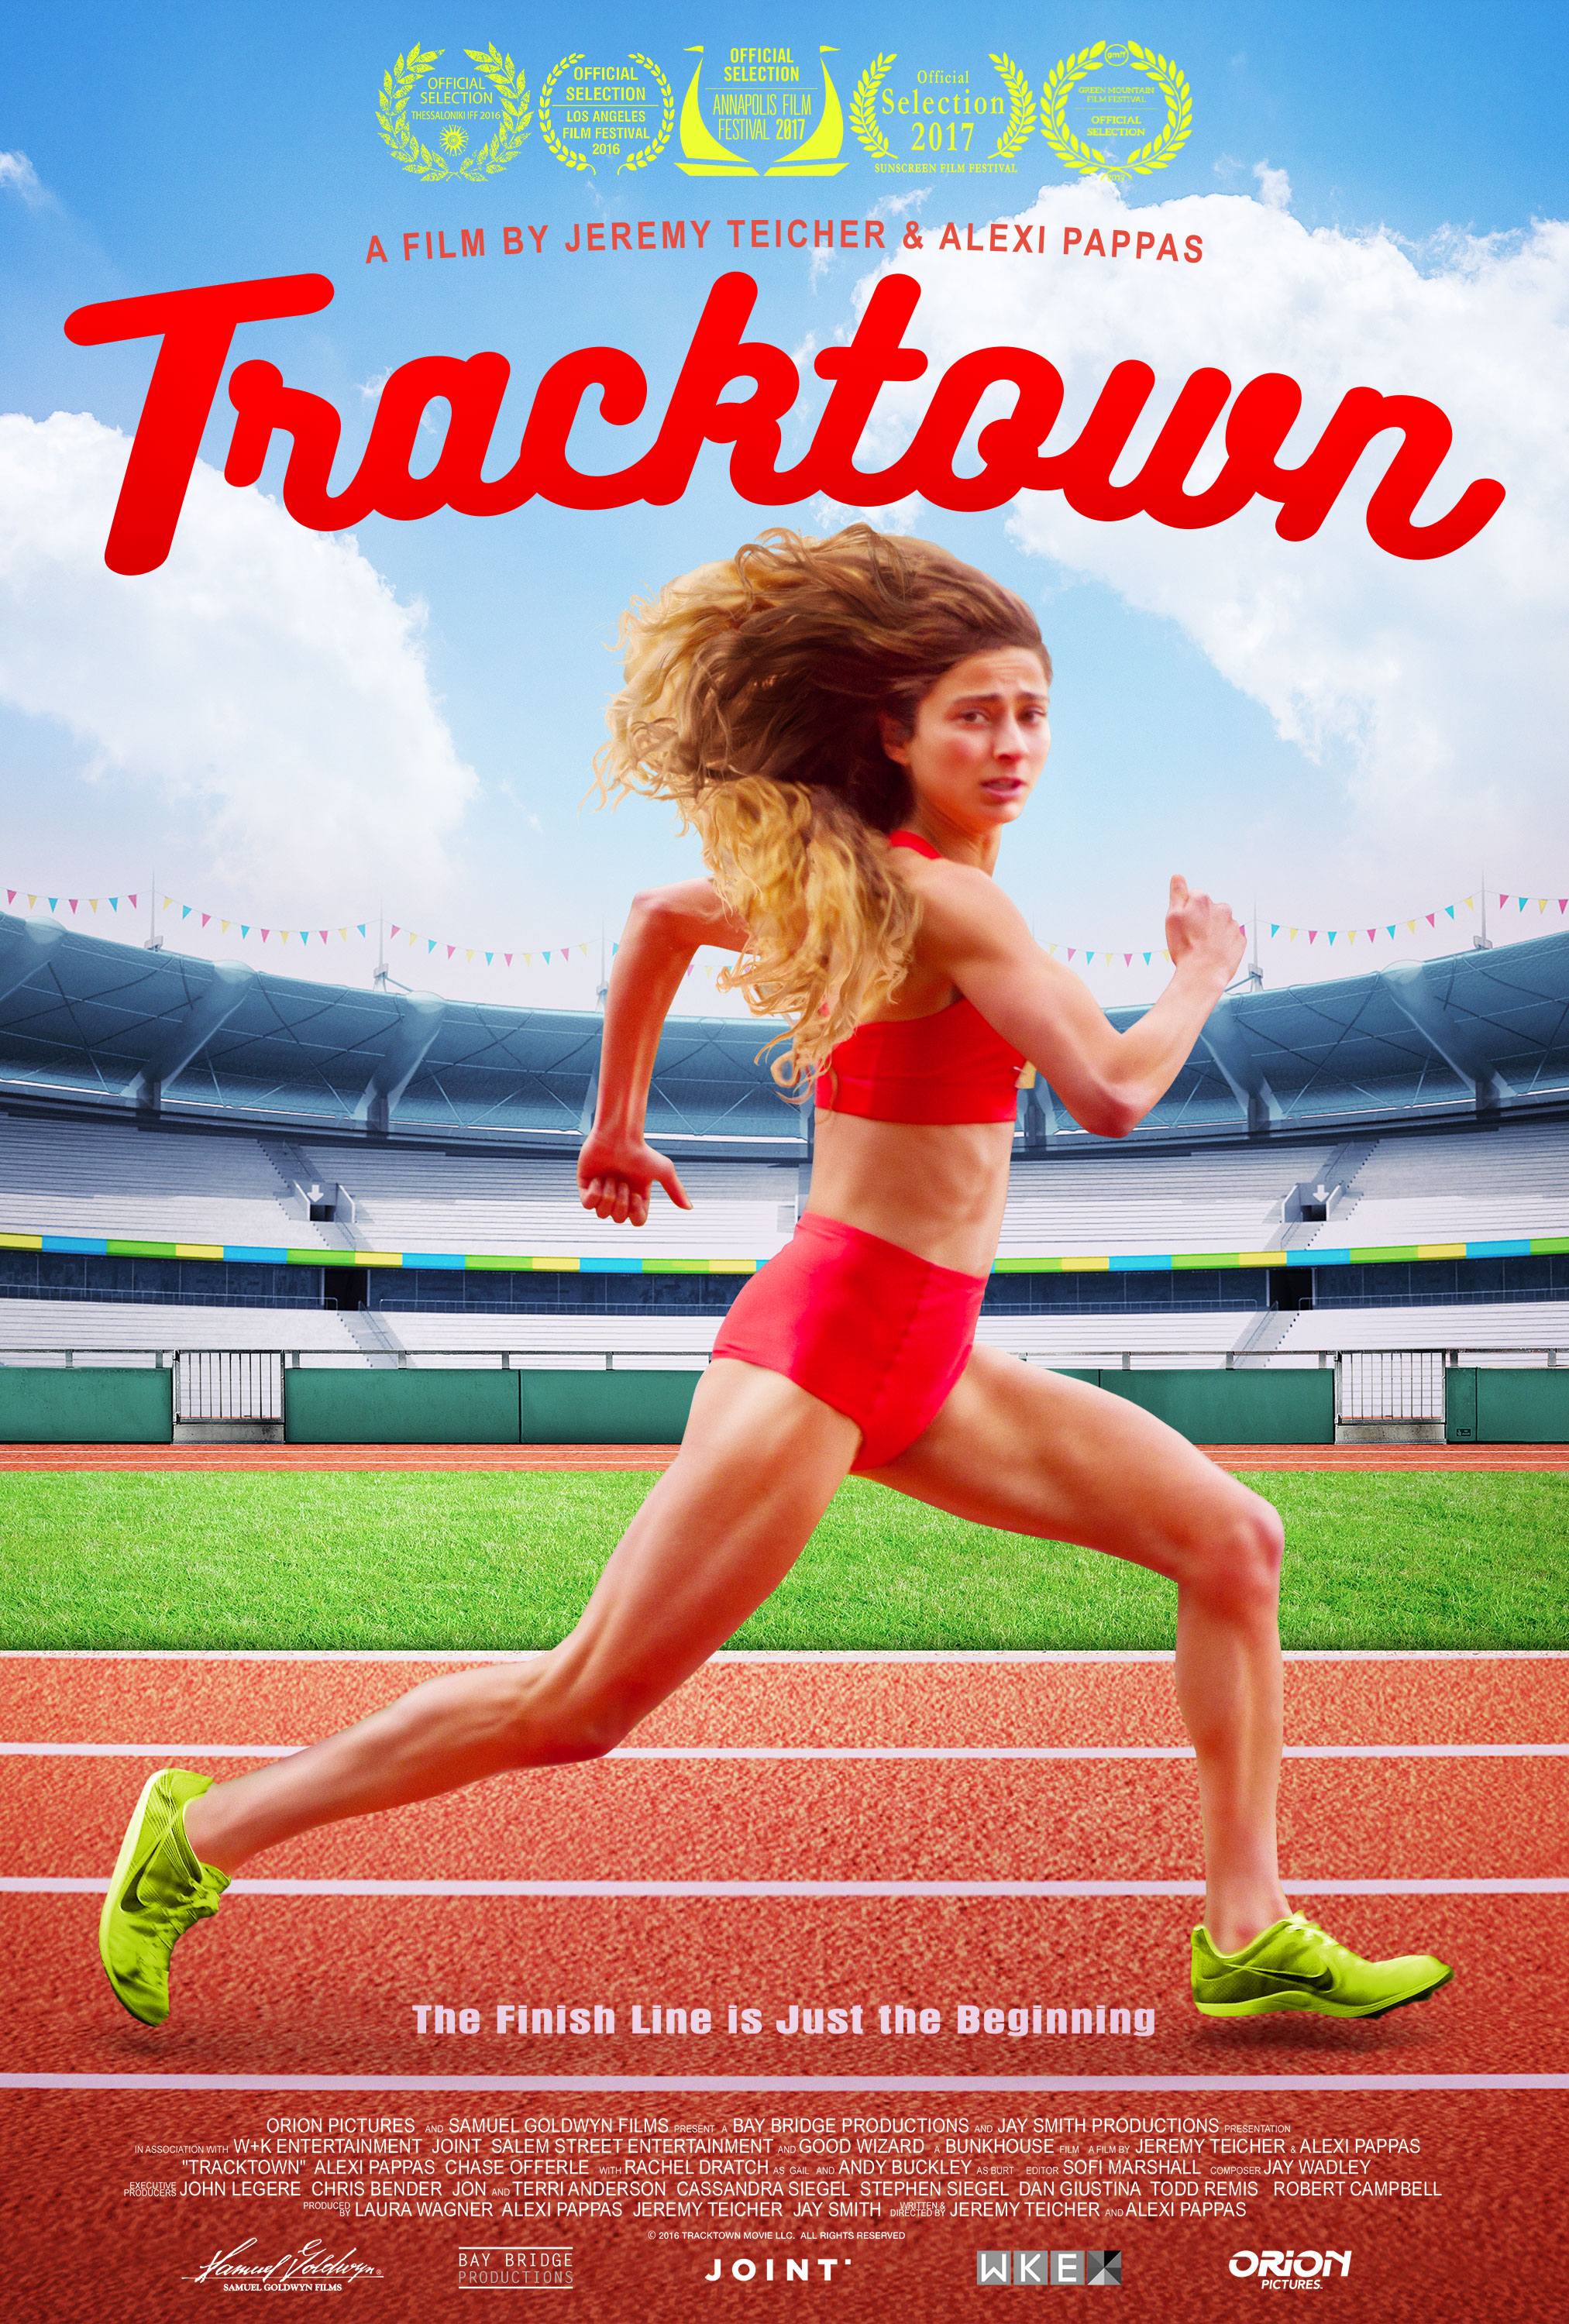 Alexi Pappas’ Olympics Movie ‘Tracktown’ Gets May Release